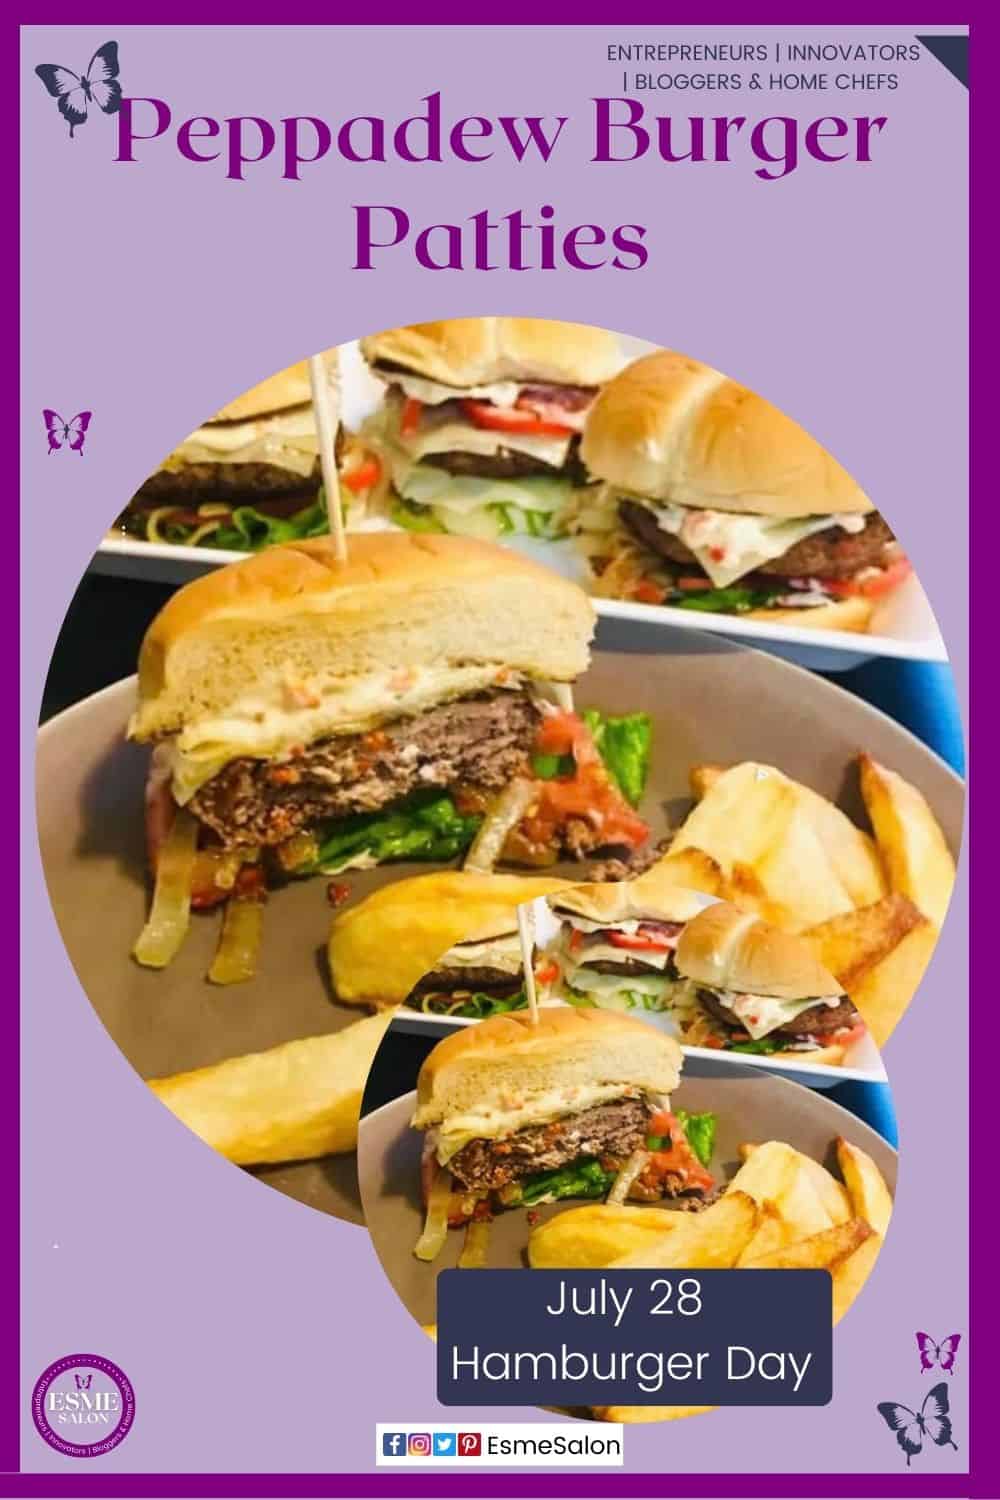 an image of Peppadew Burger Patties with some fries